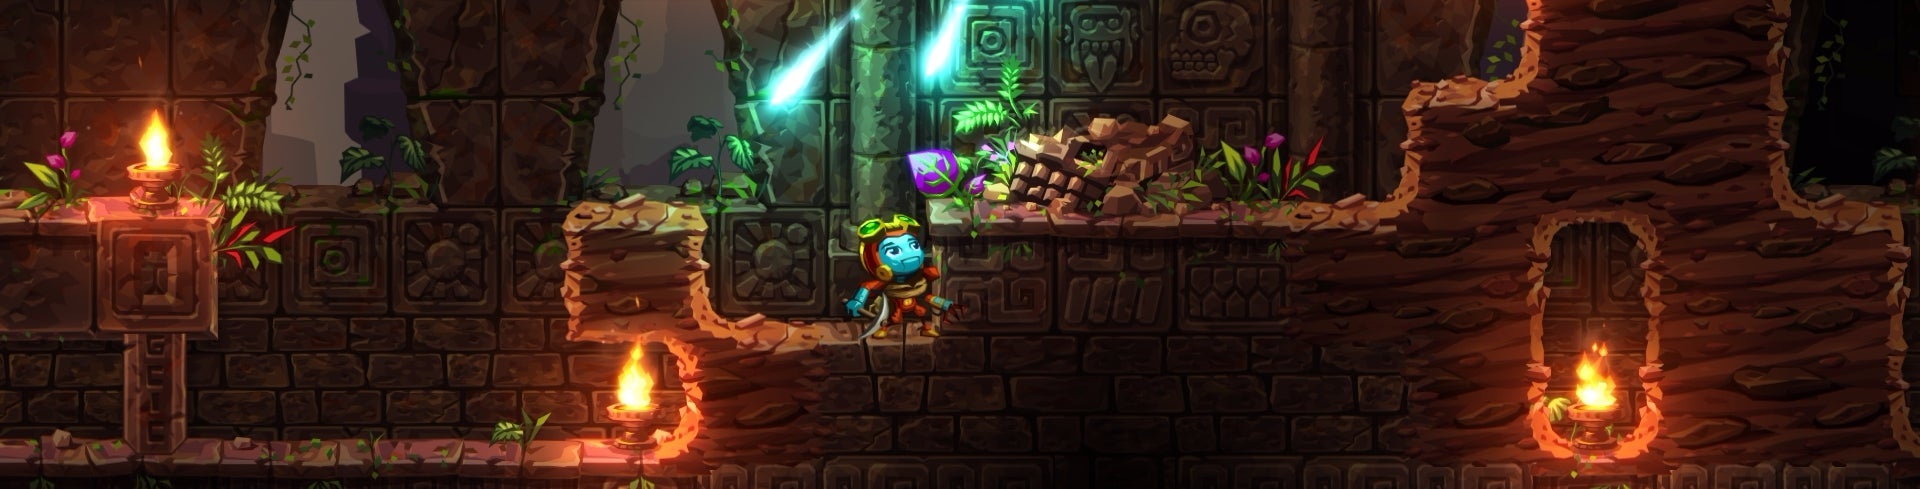 Image for SteamWorld Dig 2 review